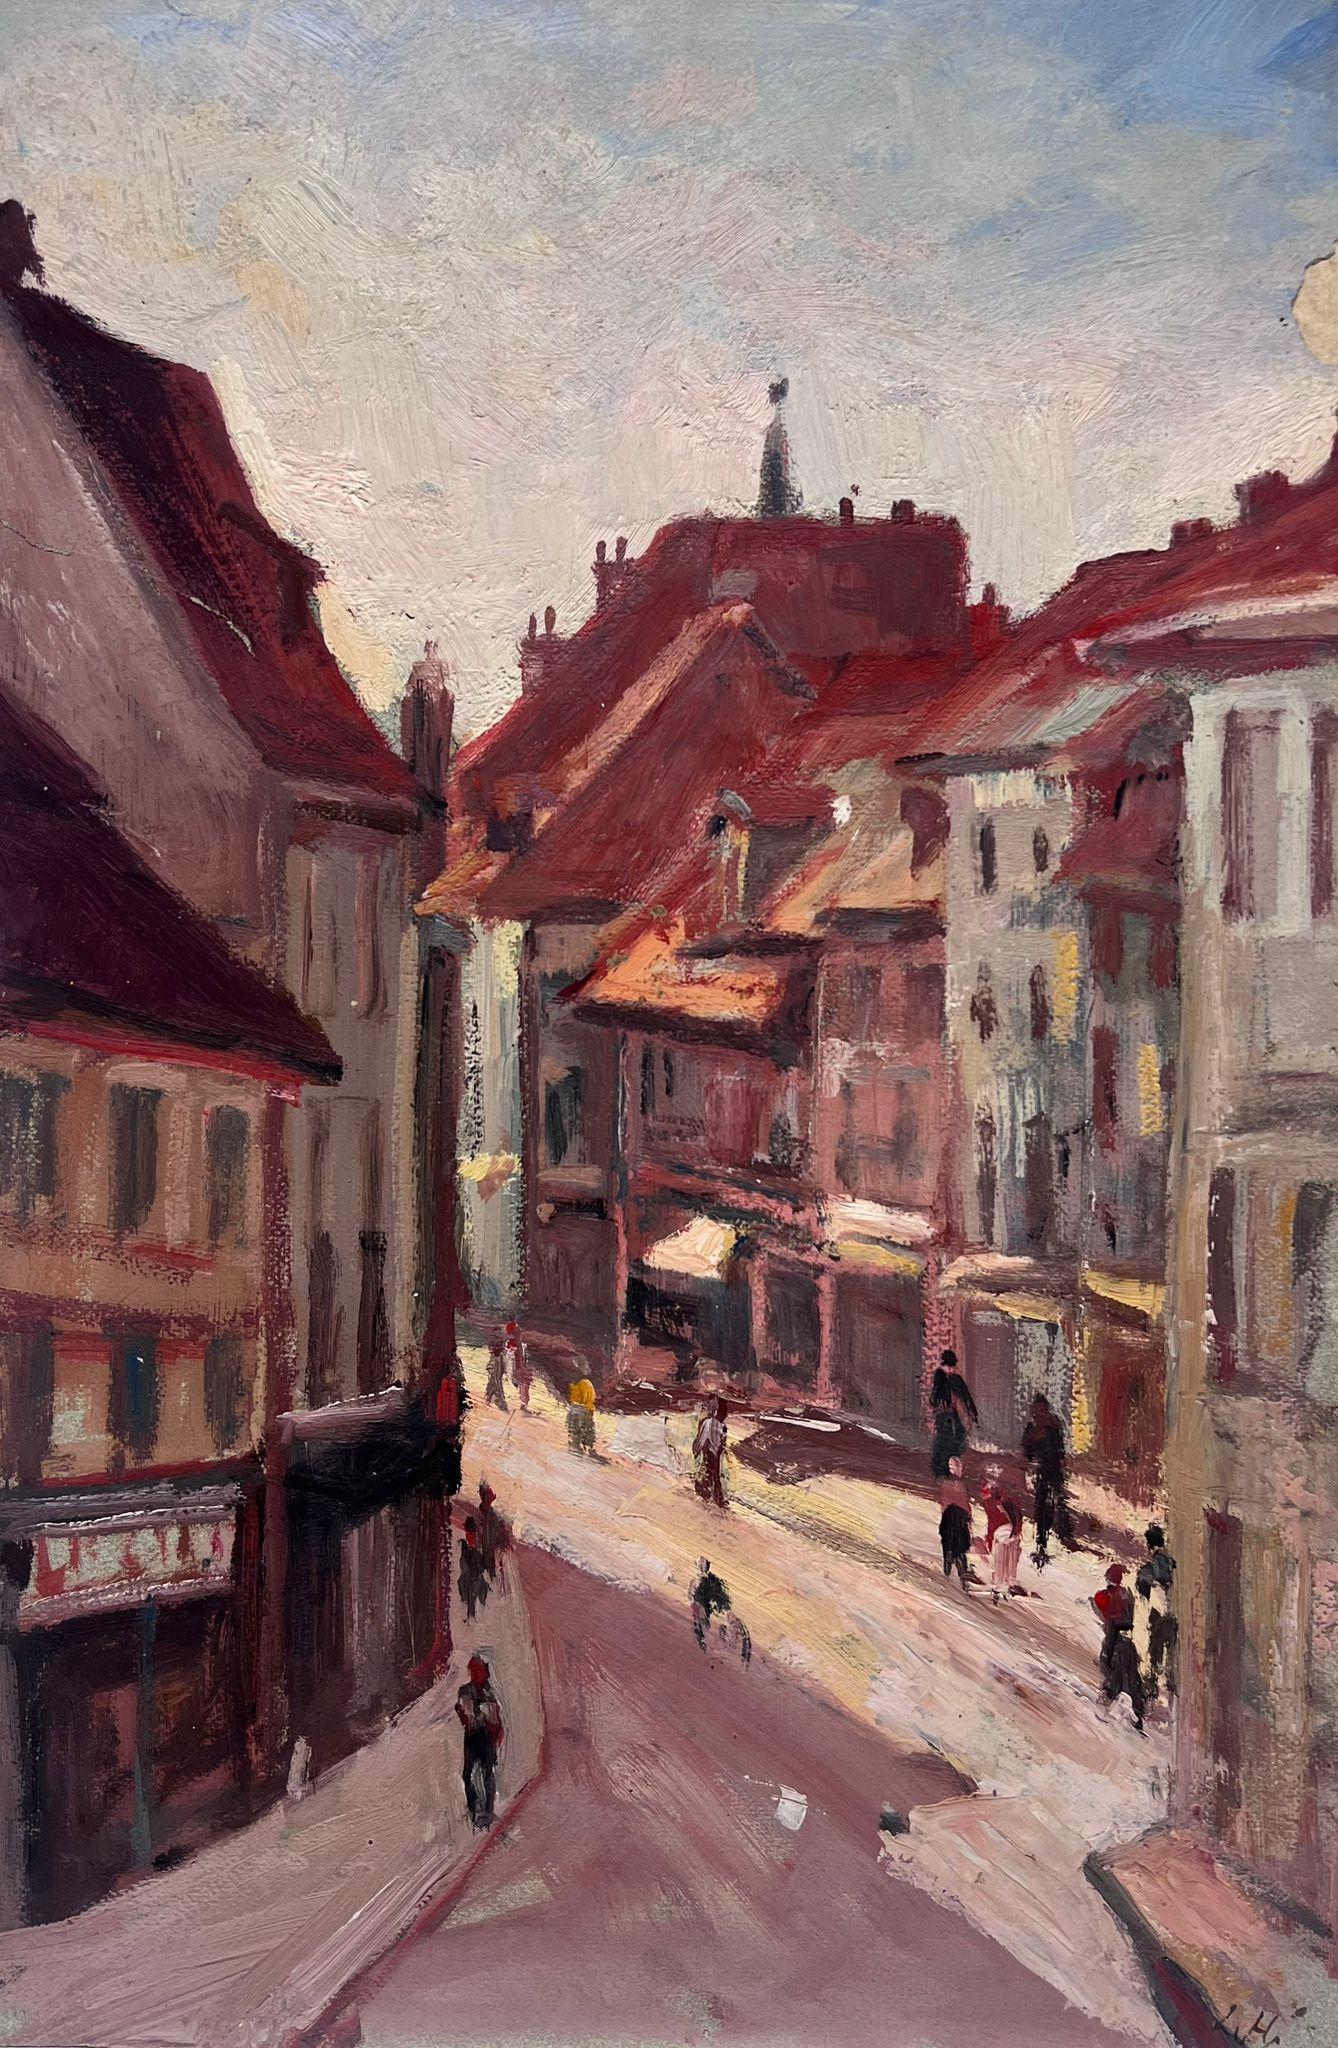 Leon Hatot Figurative Painting - Vintage French Oil Painting Red Town Landscape With Figures 